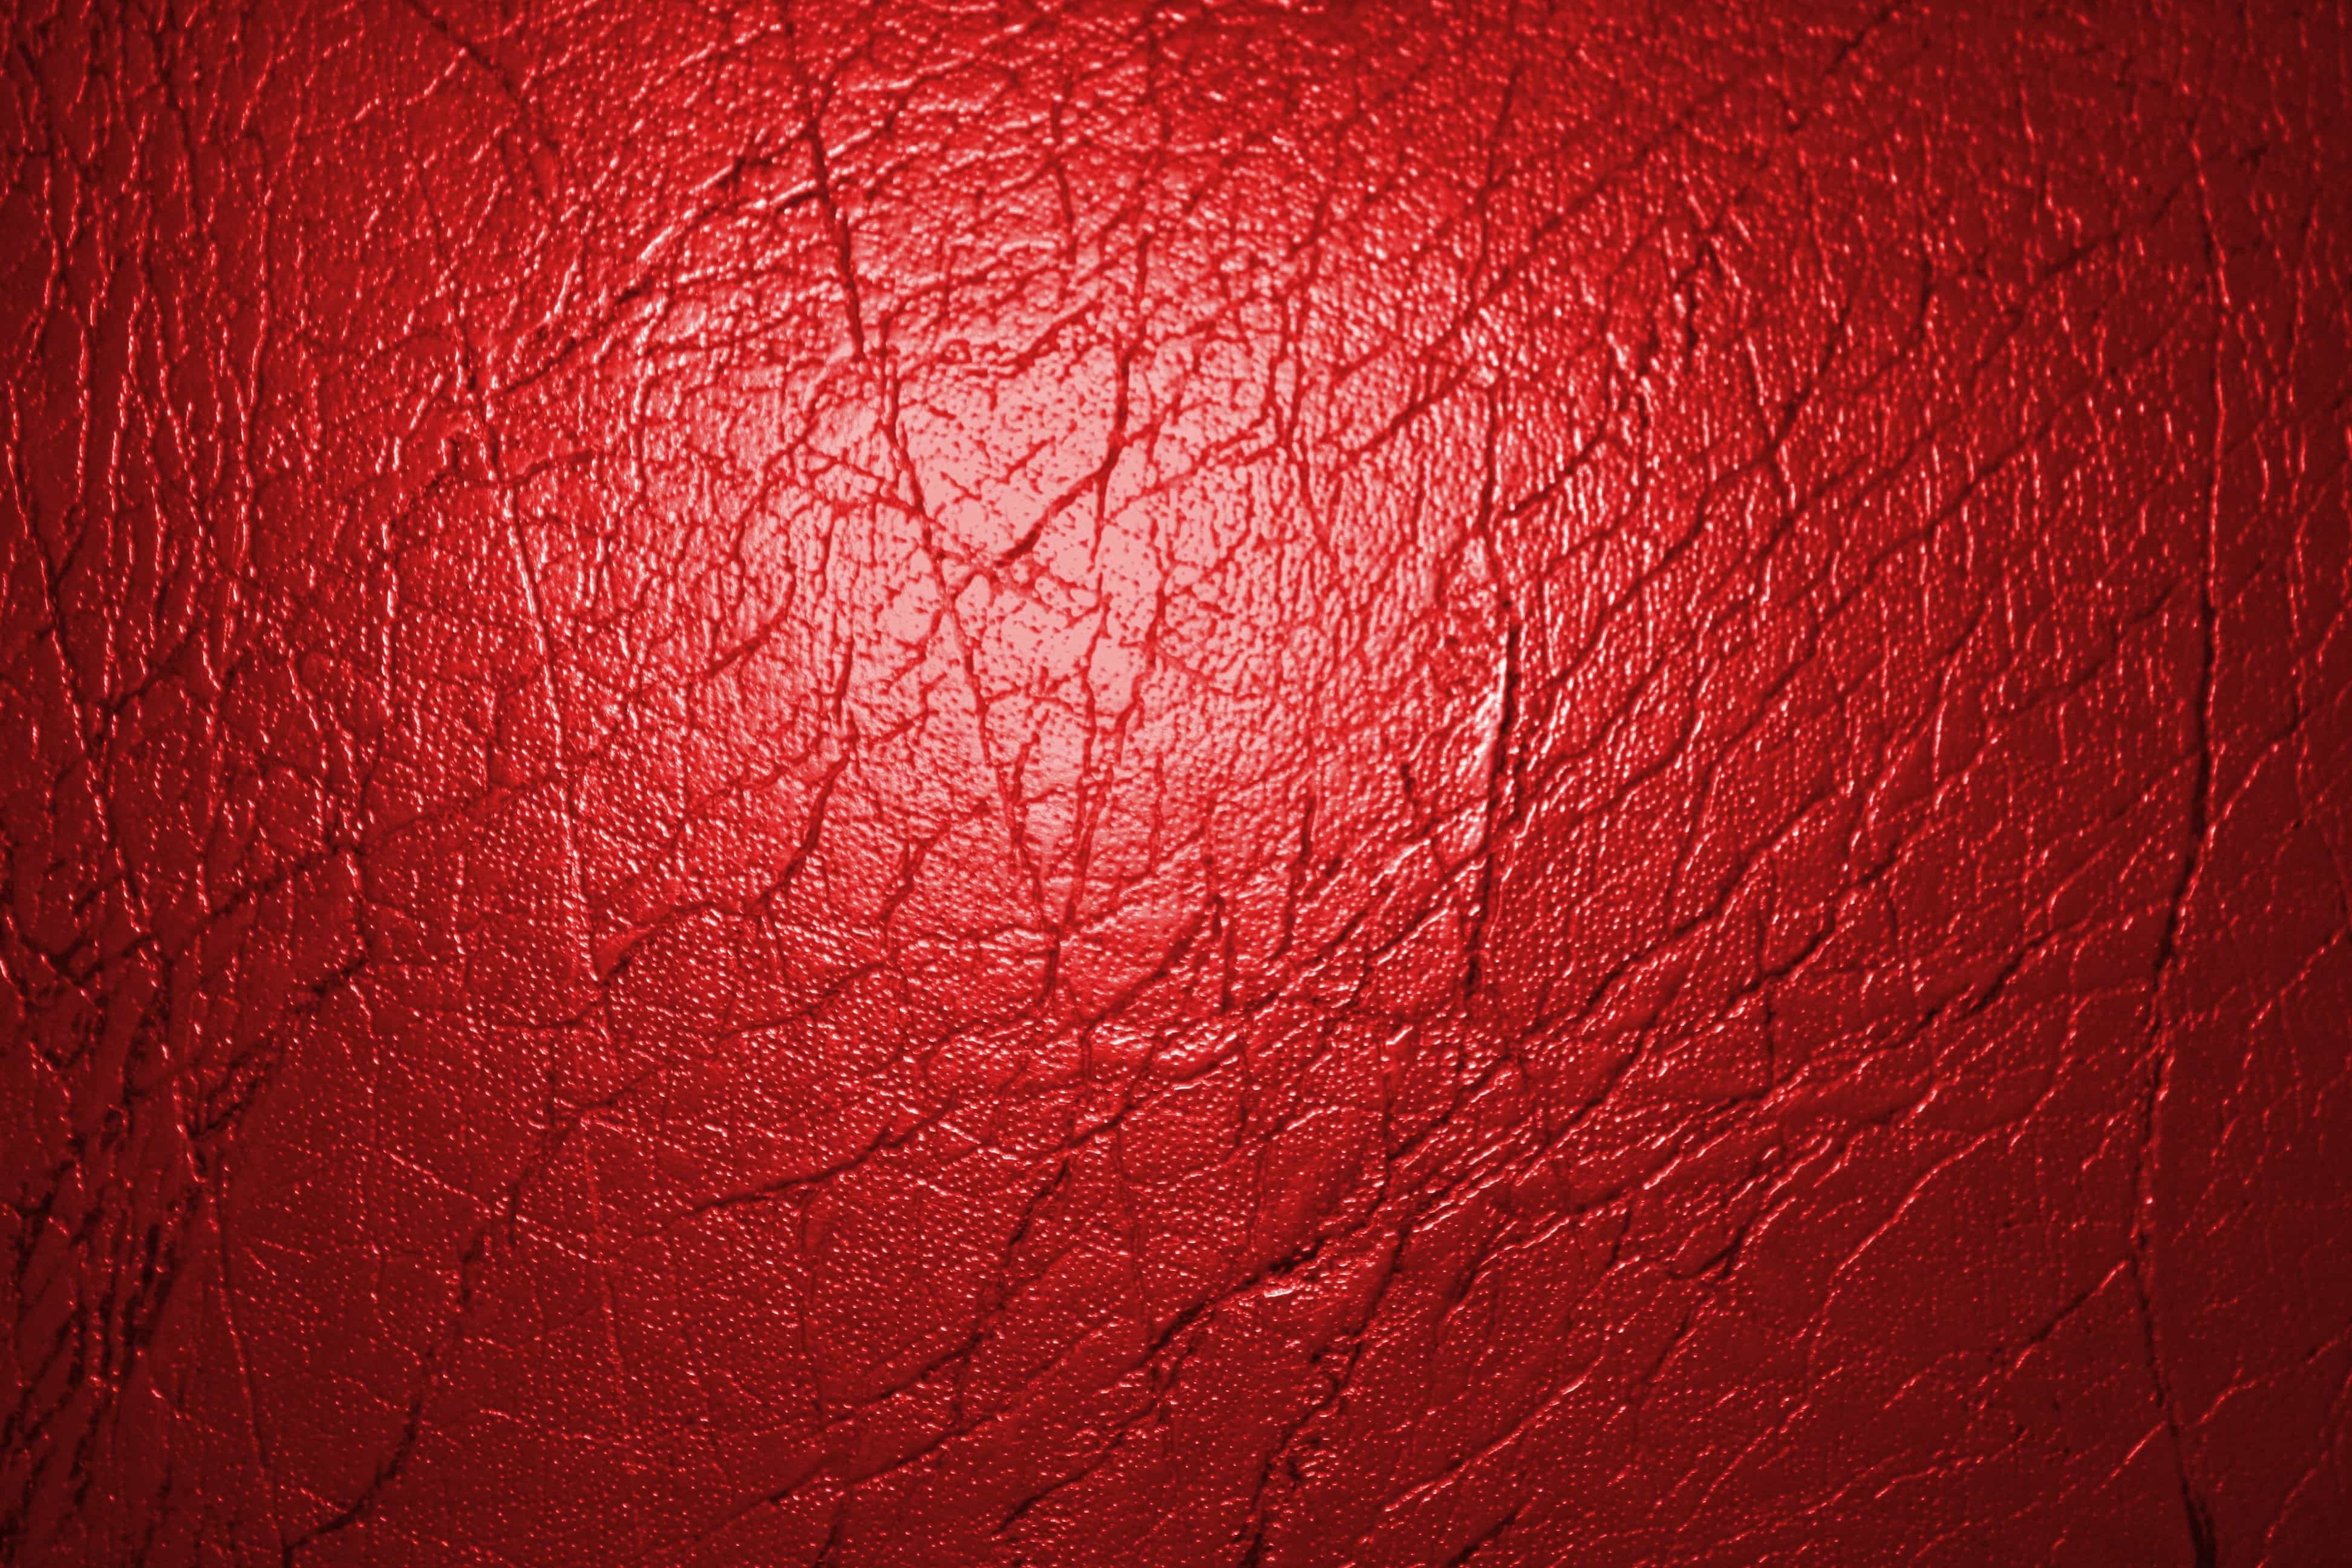 A close up picture of a red leather